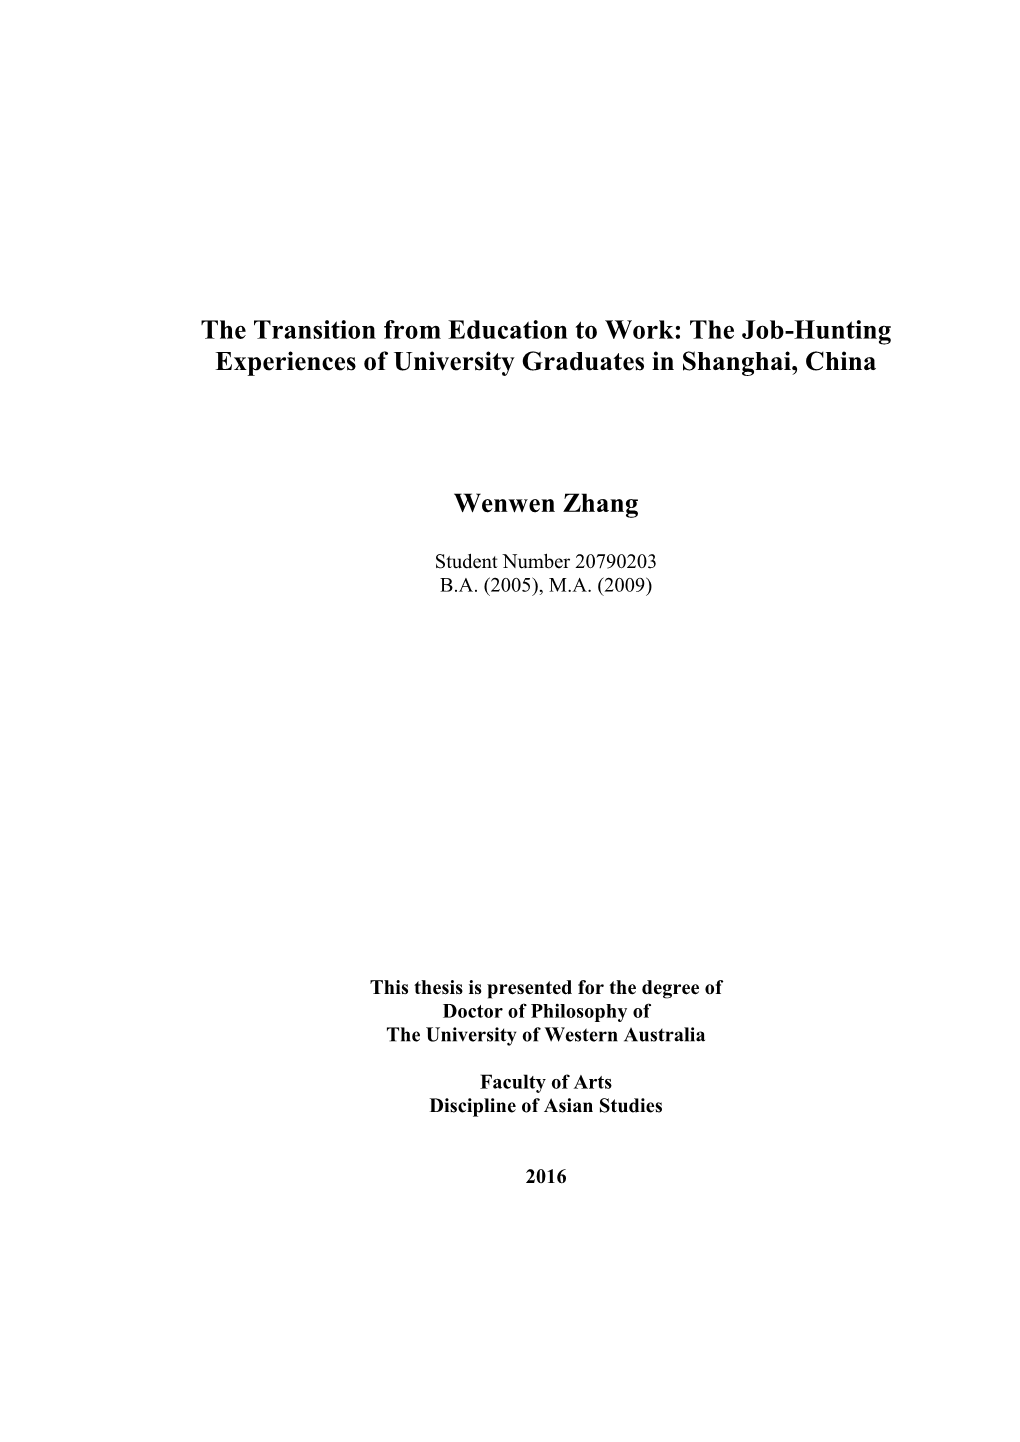 The Transition from Education to Work: the Job-Hunting Experiences of University Graduates in Shanghai, China